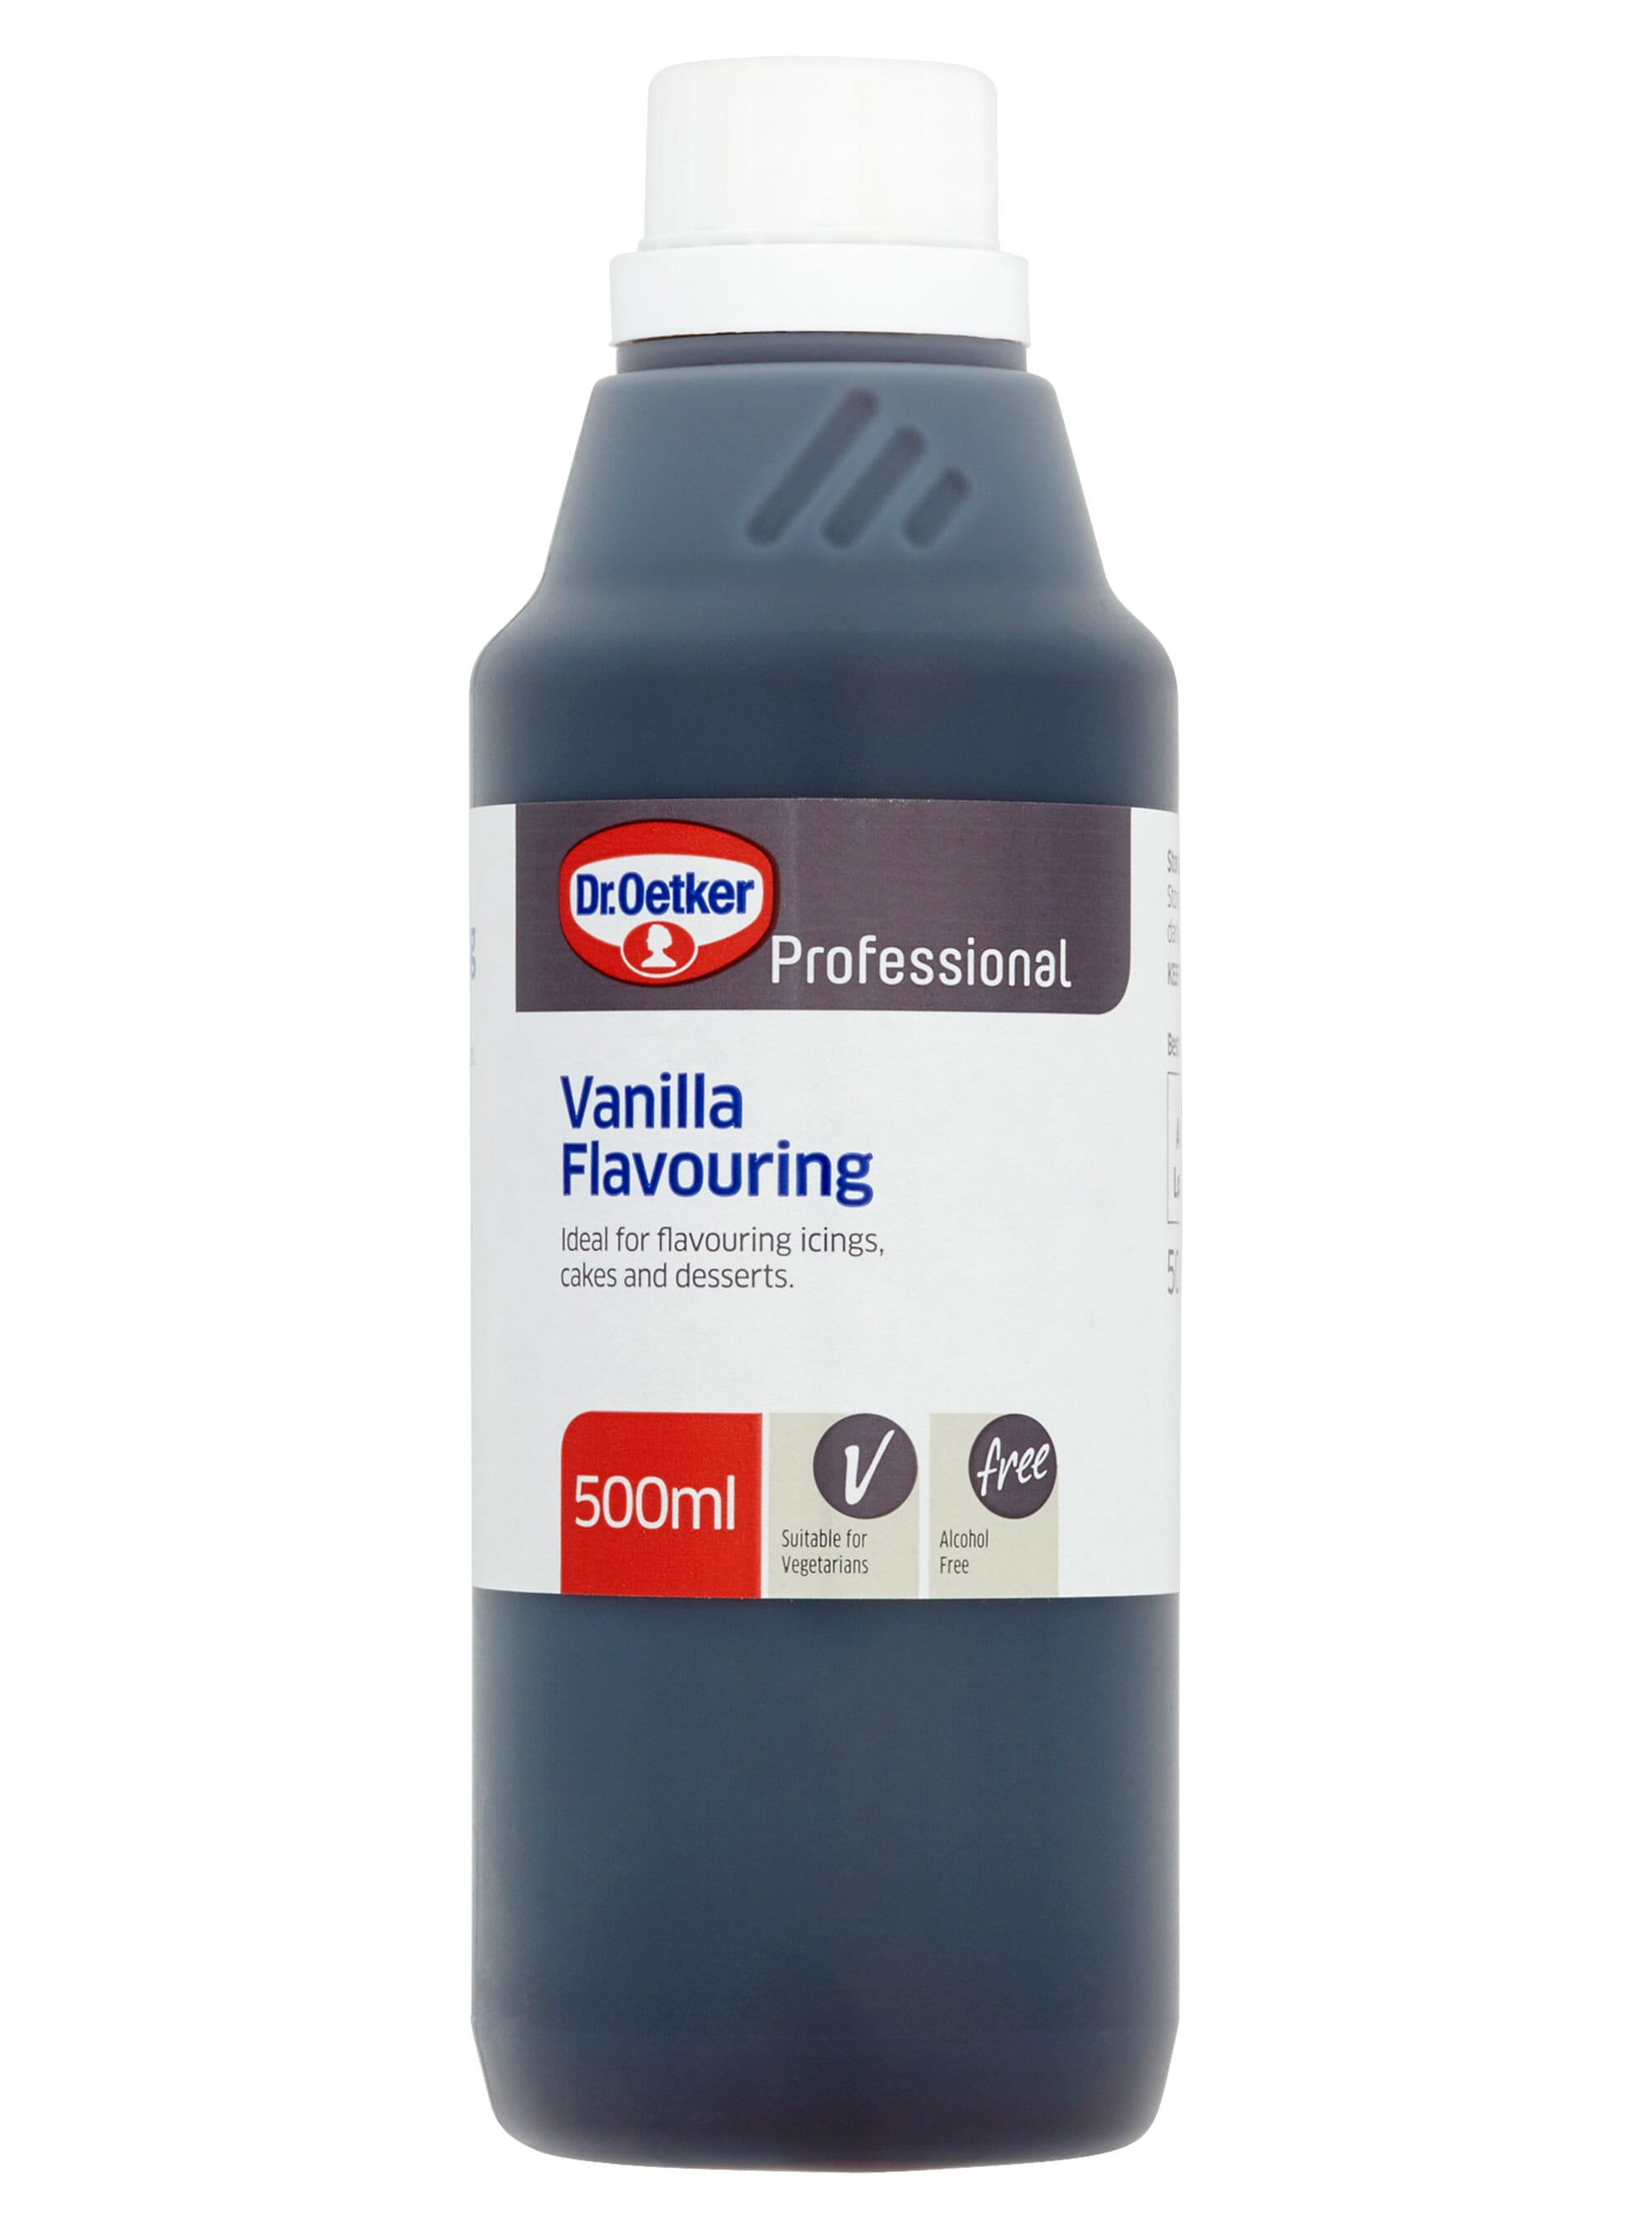 Dr. Oetker Professional Vanilla Flavouring - 6x500ml - Picture 1 of 1